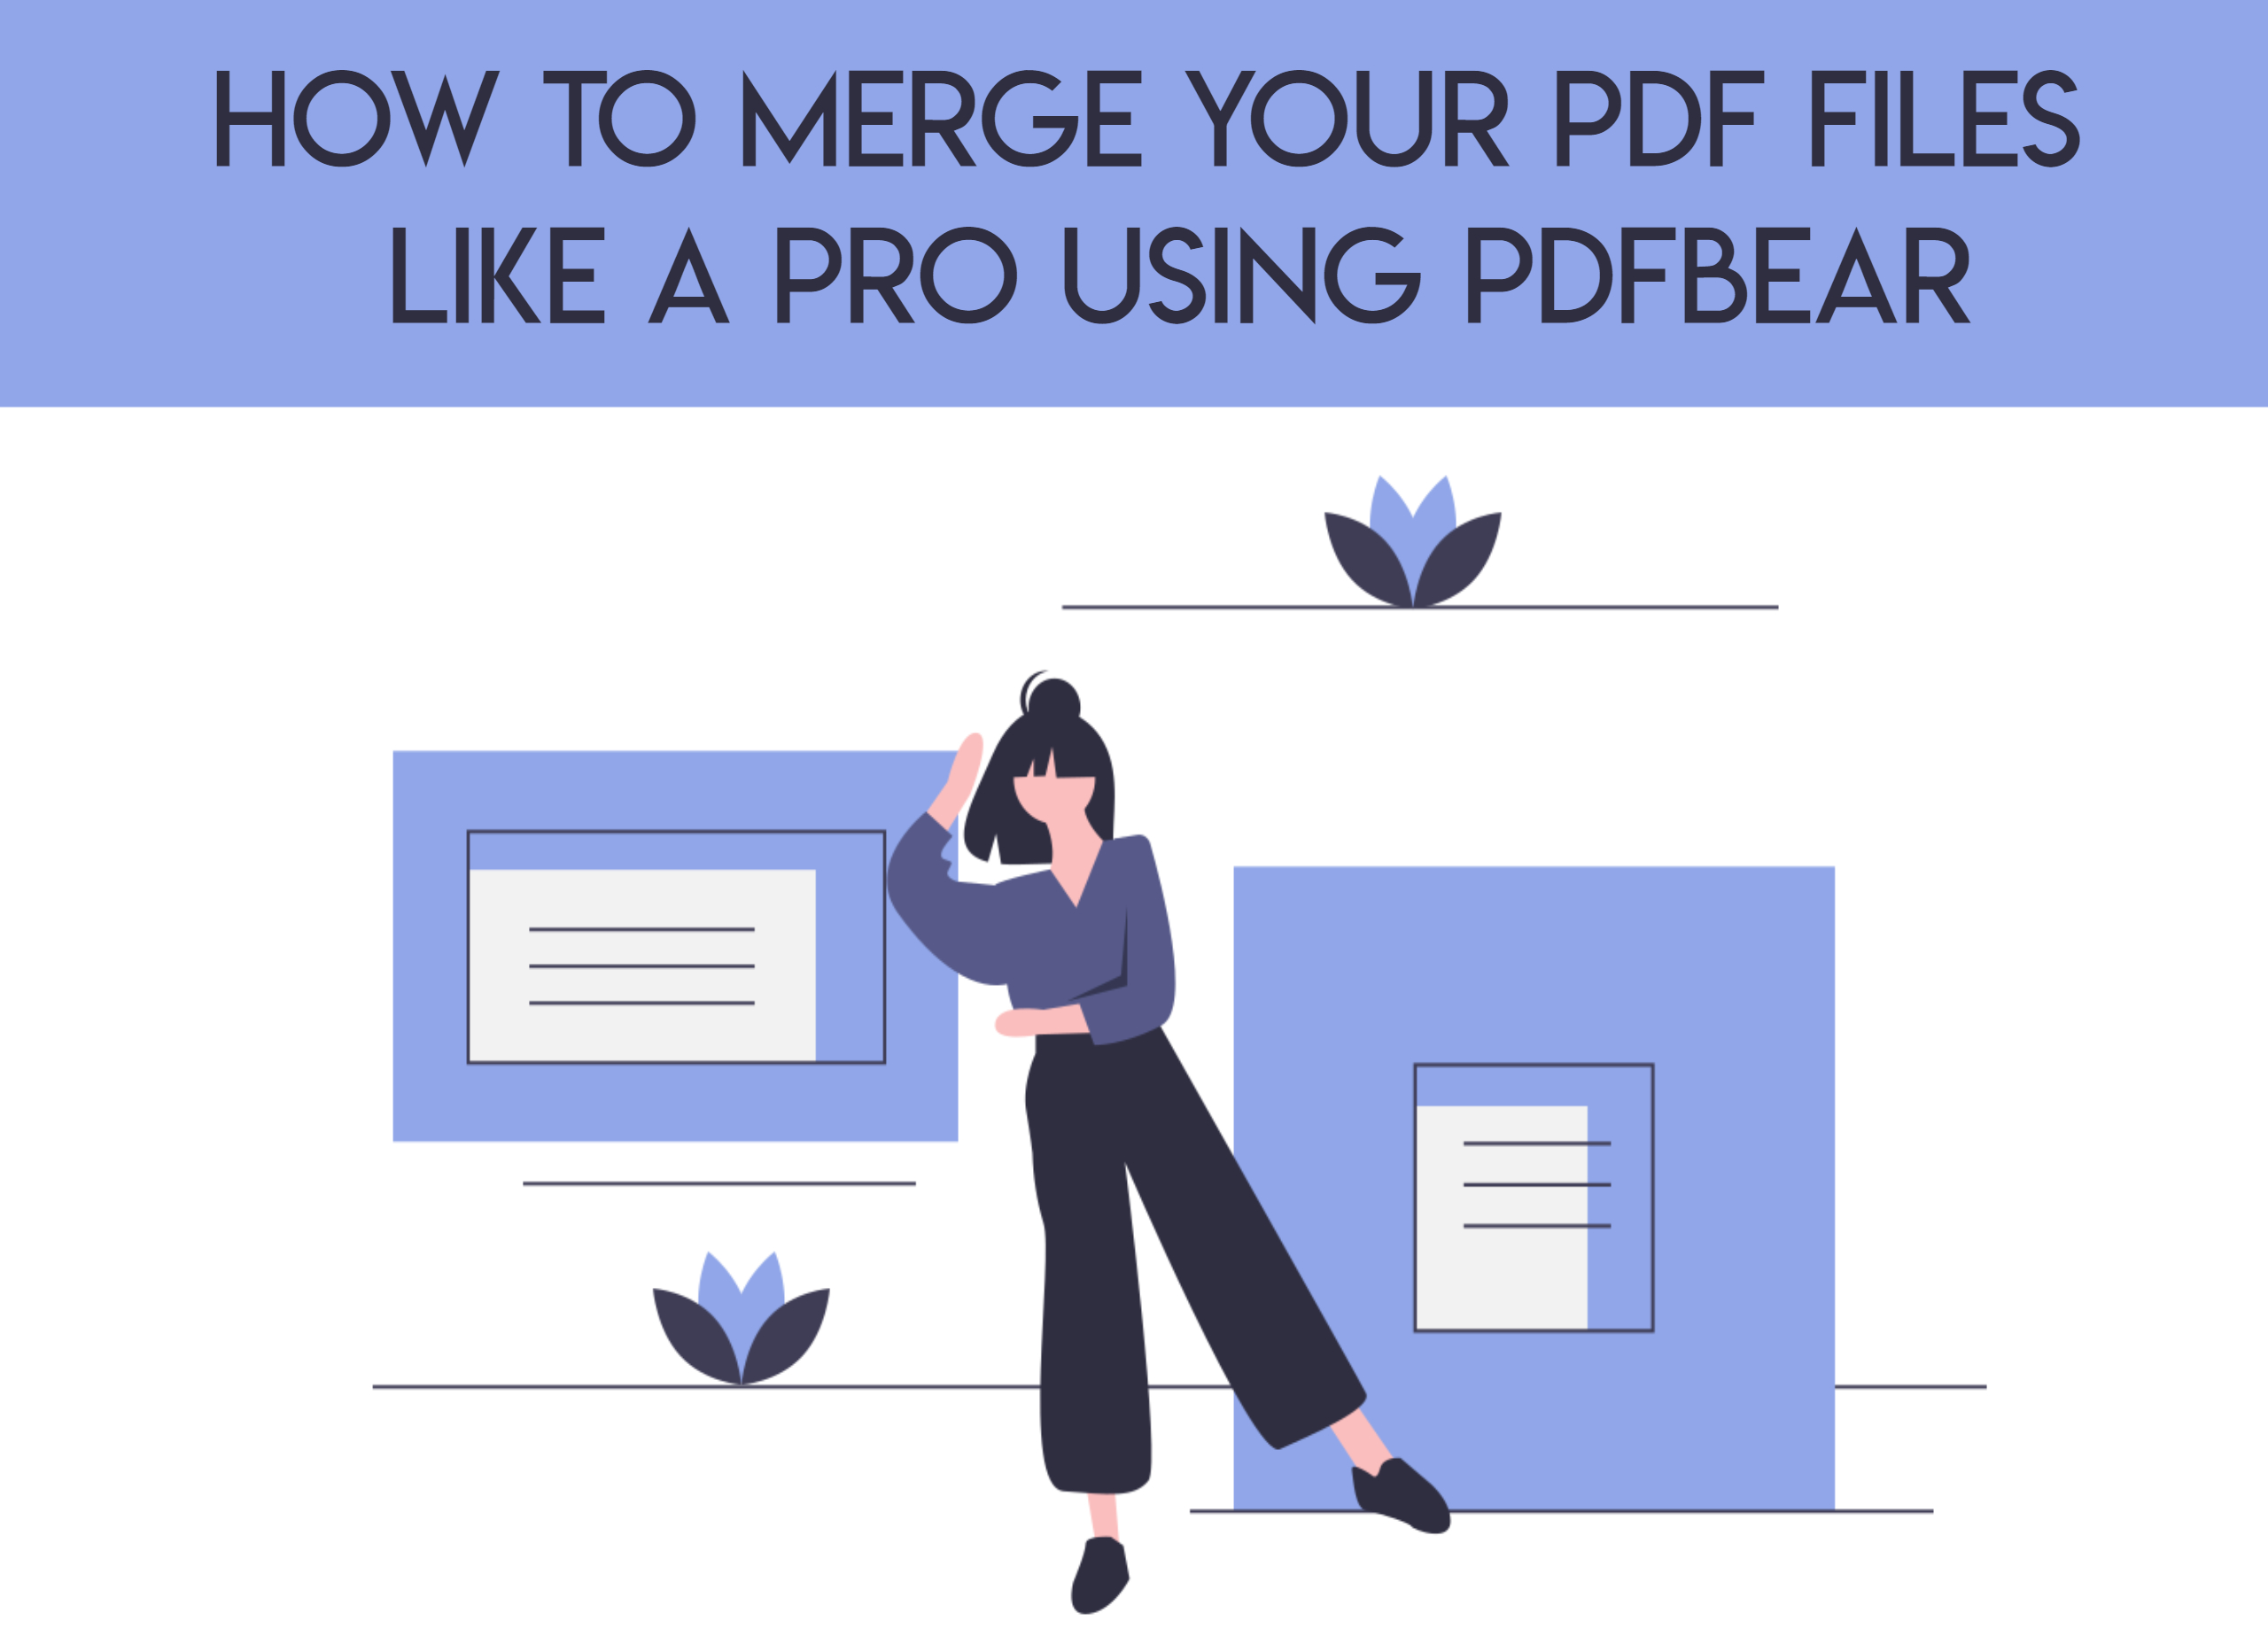 How to Merge Your PDF Files Like a Pro Using PDFBear